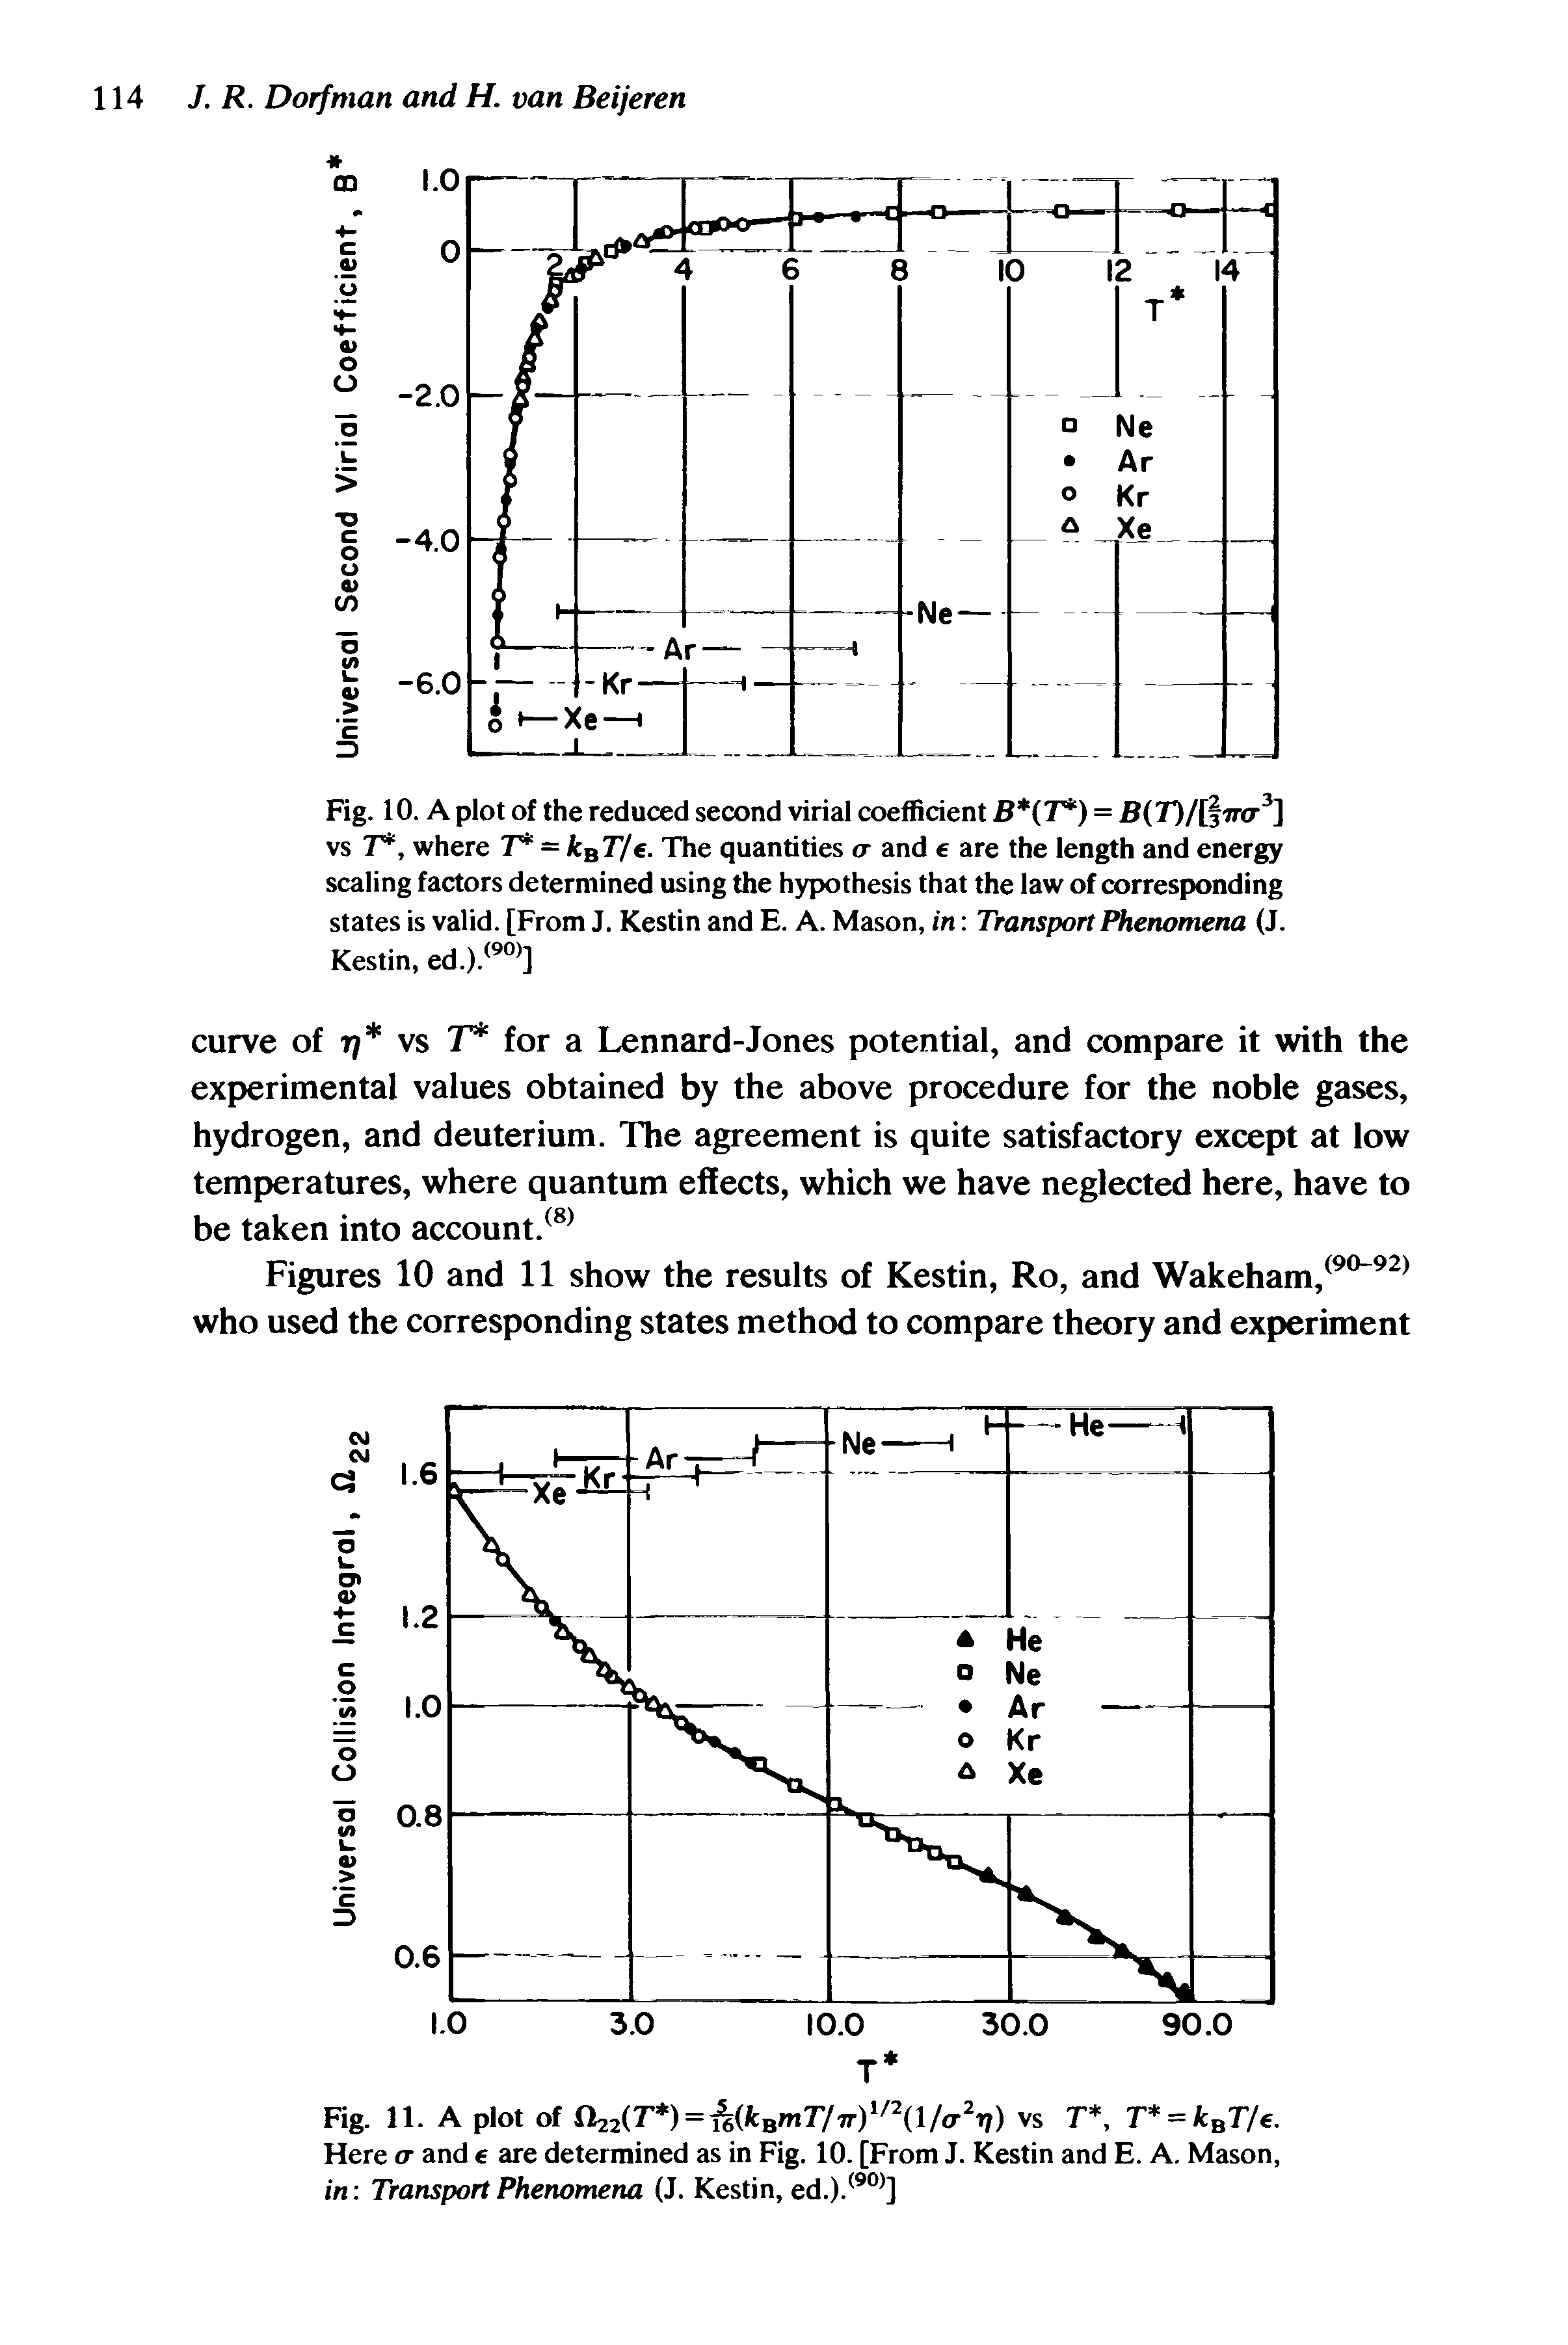 Fig. 10. A plot of the reduced second virial coefficient B (T ) = vs T, where T = k T/e. The quantities a and e are the length and energy scaling factors determined using the hypothesis that the law of corresponding states is valid. [From J. Kestin and E. A. Mason, in Transport Phenomena (J.